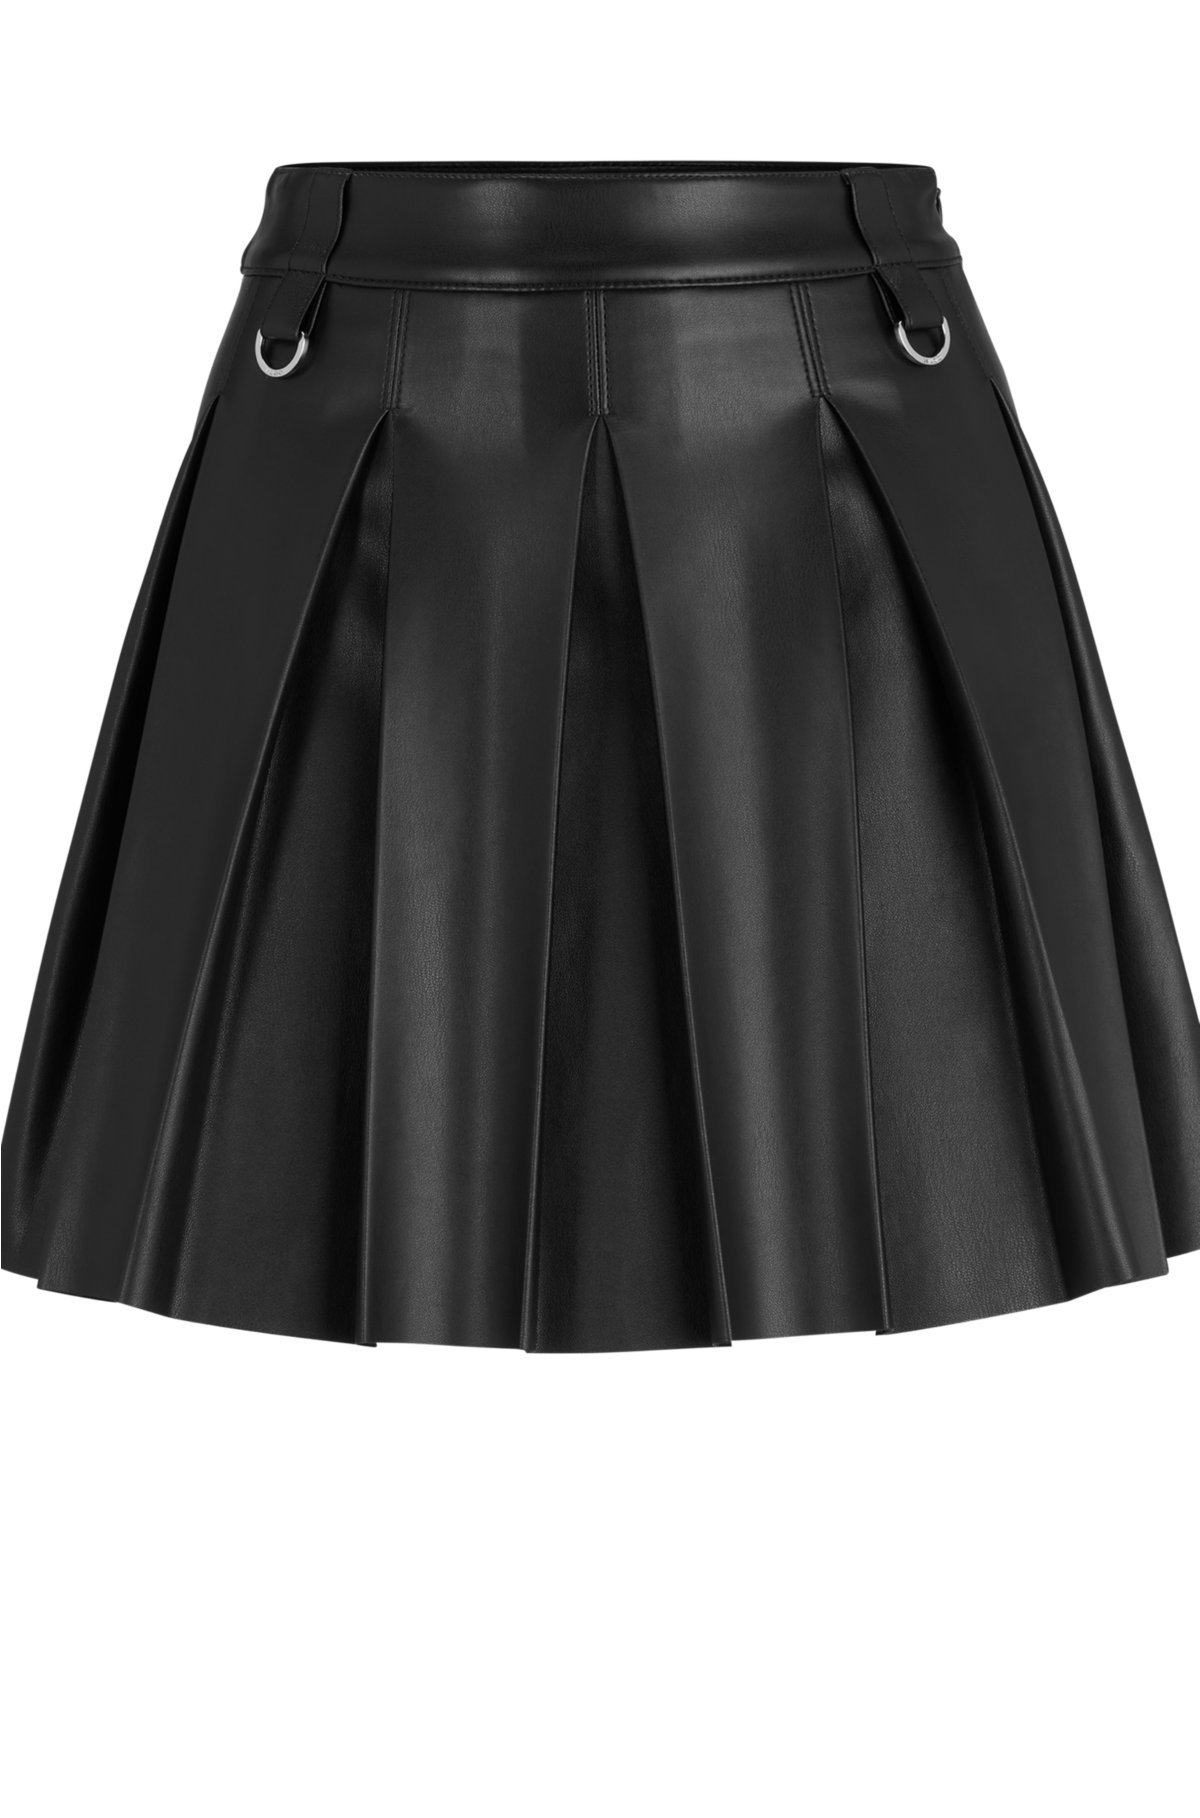 Womens Ladies High Waist Mini Skirts Faux Leather Wet Look Flared Skater  Skirt